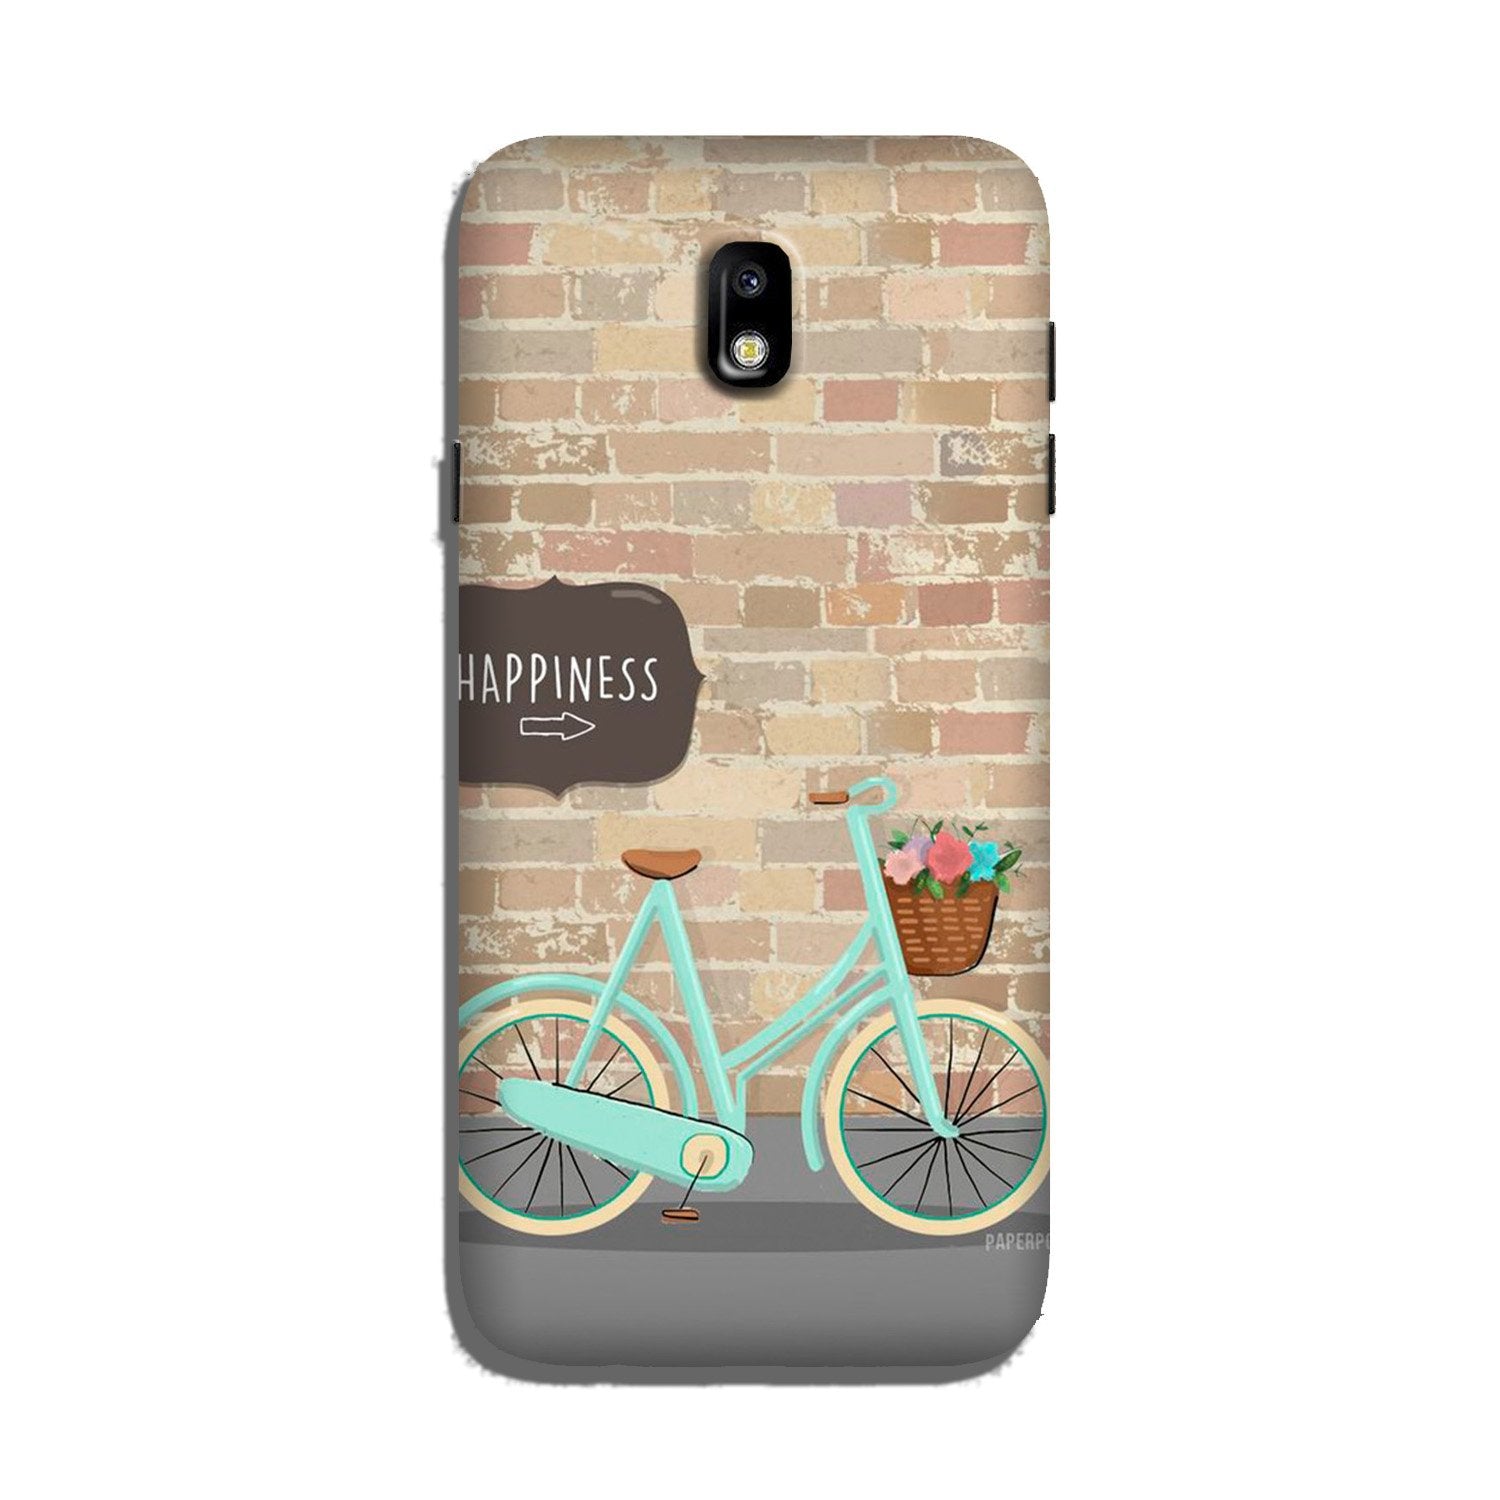 Happiness Case for Galaxy J3 Pro